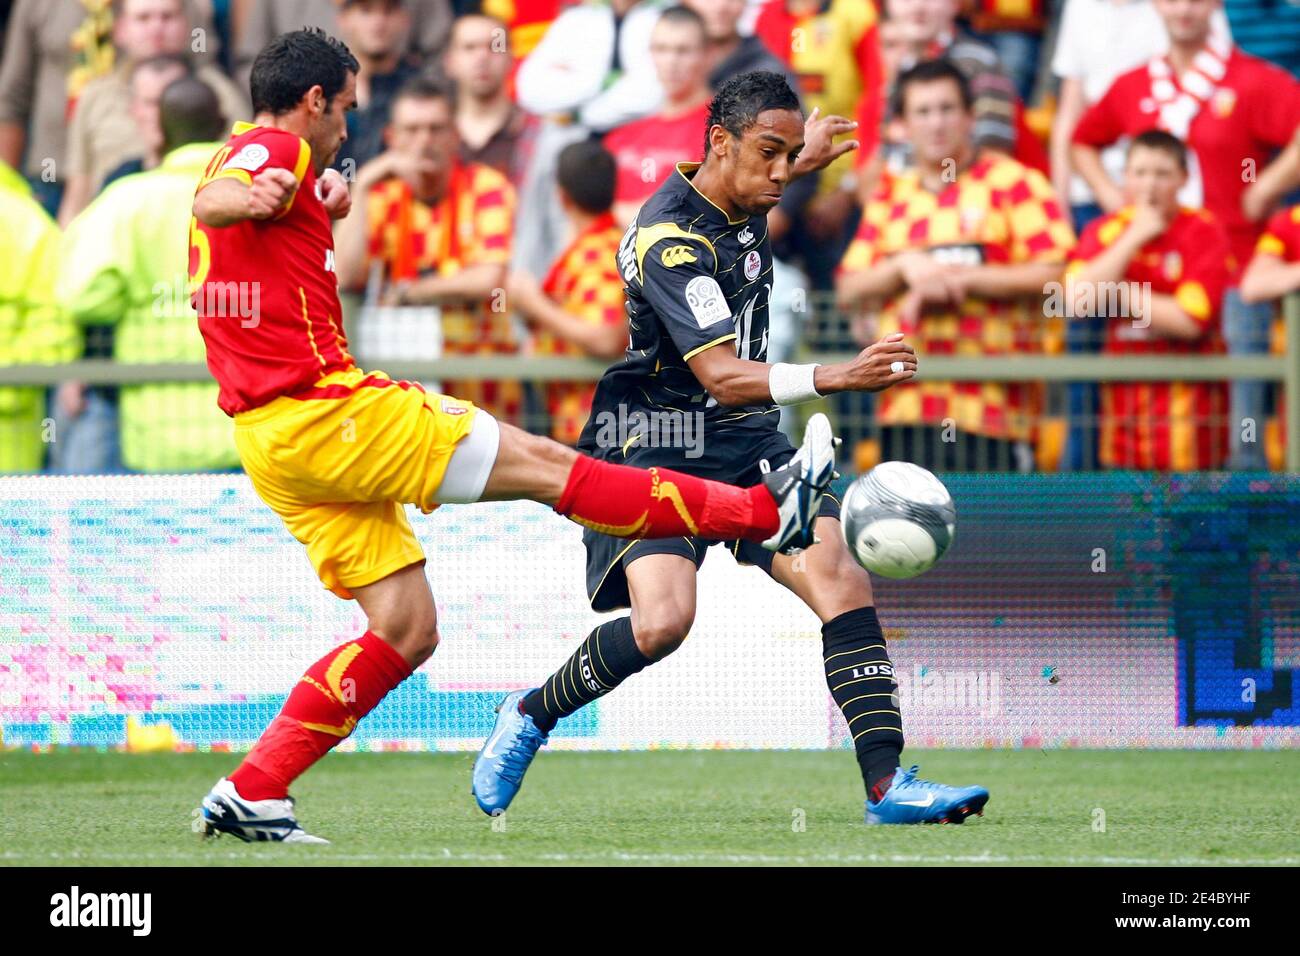 Lens' Fabien Laurenti fights for the ball with Lille's Pierre-Emerick Aubameyang during the French First League Soccer Match, RC Lens vs Lille OSC at Felix Bollaert Stadium in Lens, France on September 20, 2009. The match ended in a 1-1 draw. Photo by Mik Stock Photo